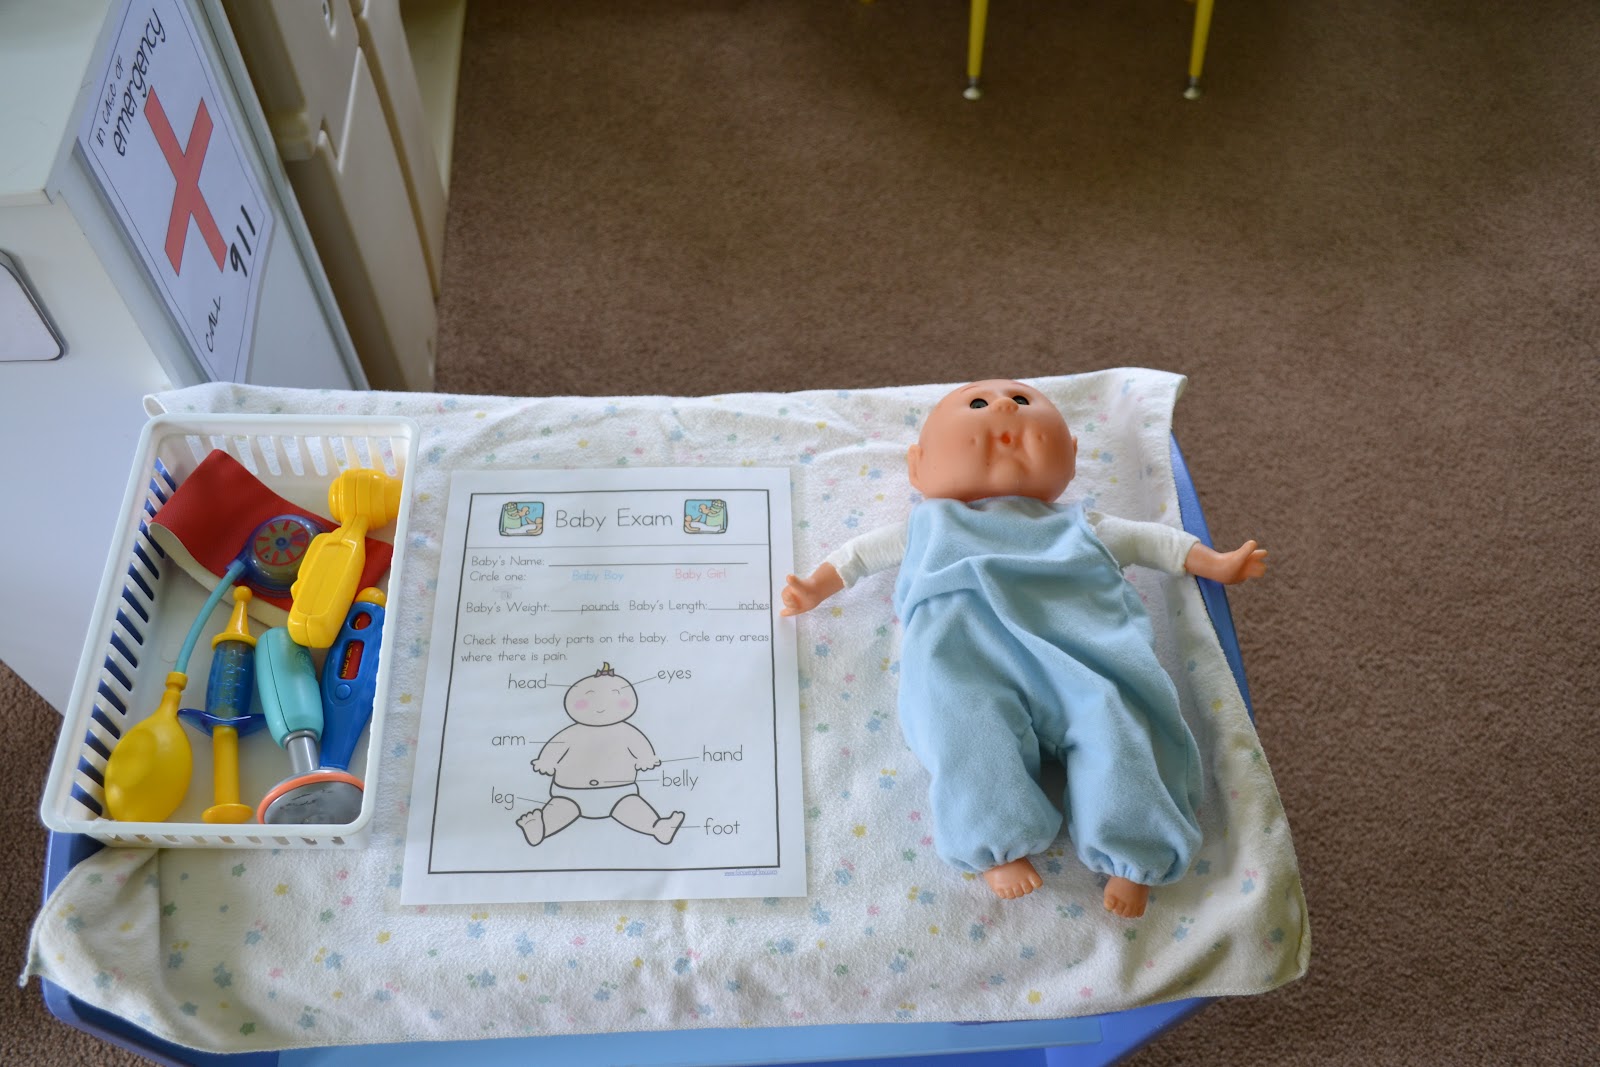 IT'S TEEA TIME PLAYSCHOOL: DRAMATIC PLAY HEALTH CARE SYSTEM